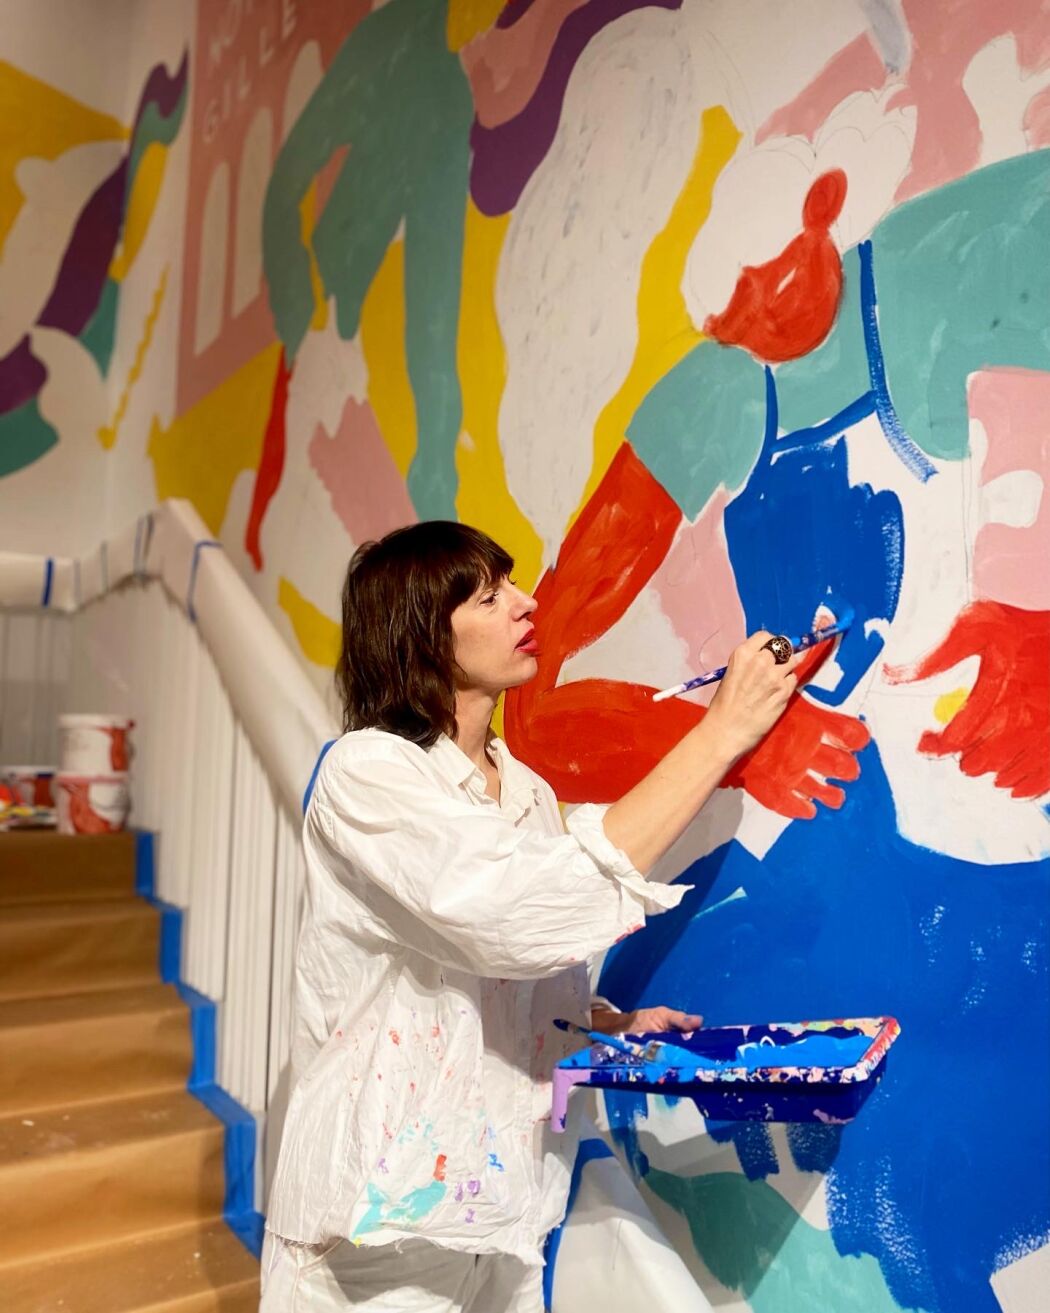 Mural-painting process by illustration artist Erica Jacobson at Sven-Harrys Art Museum.